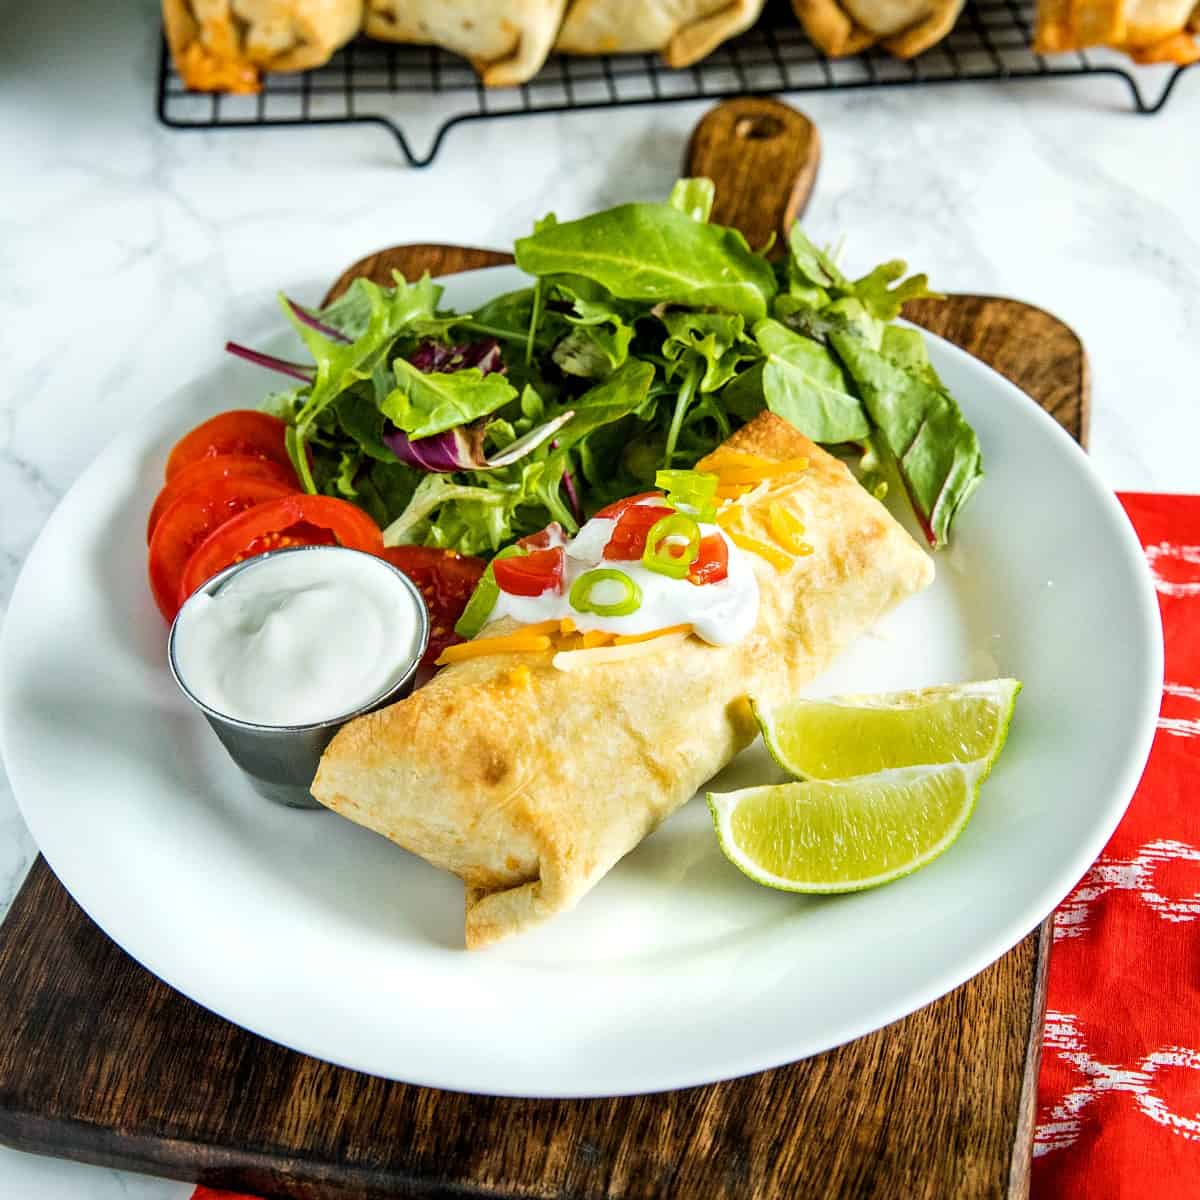 Baked Chicken Chimichangas - Mexican Recipes - Old El Paso